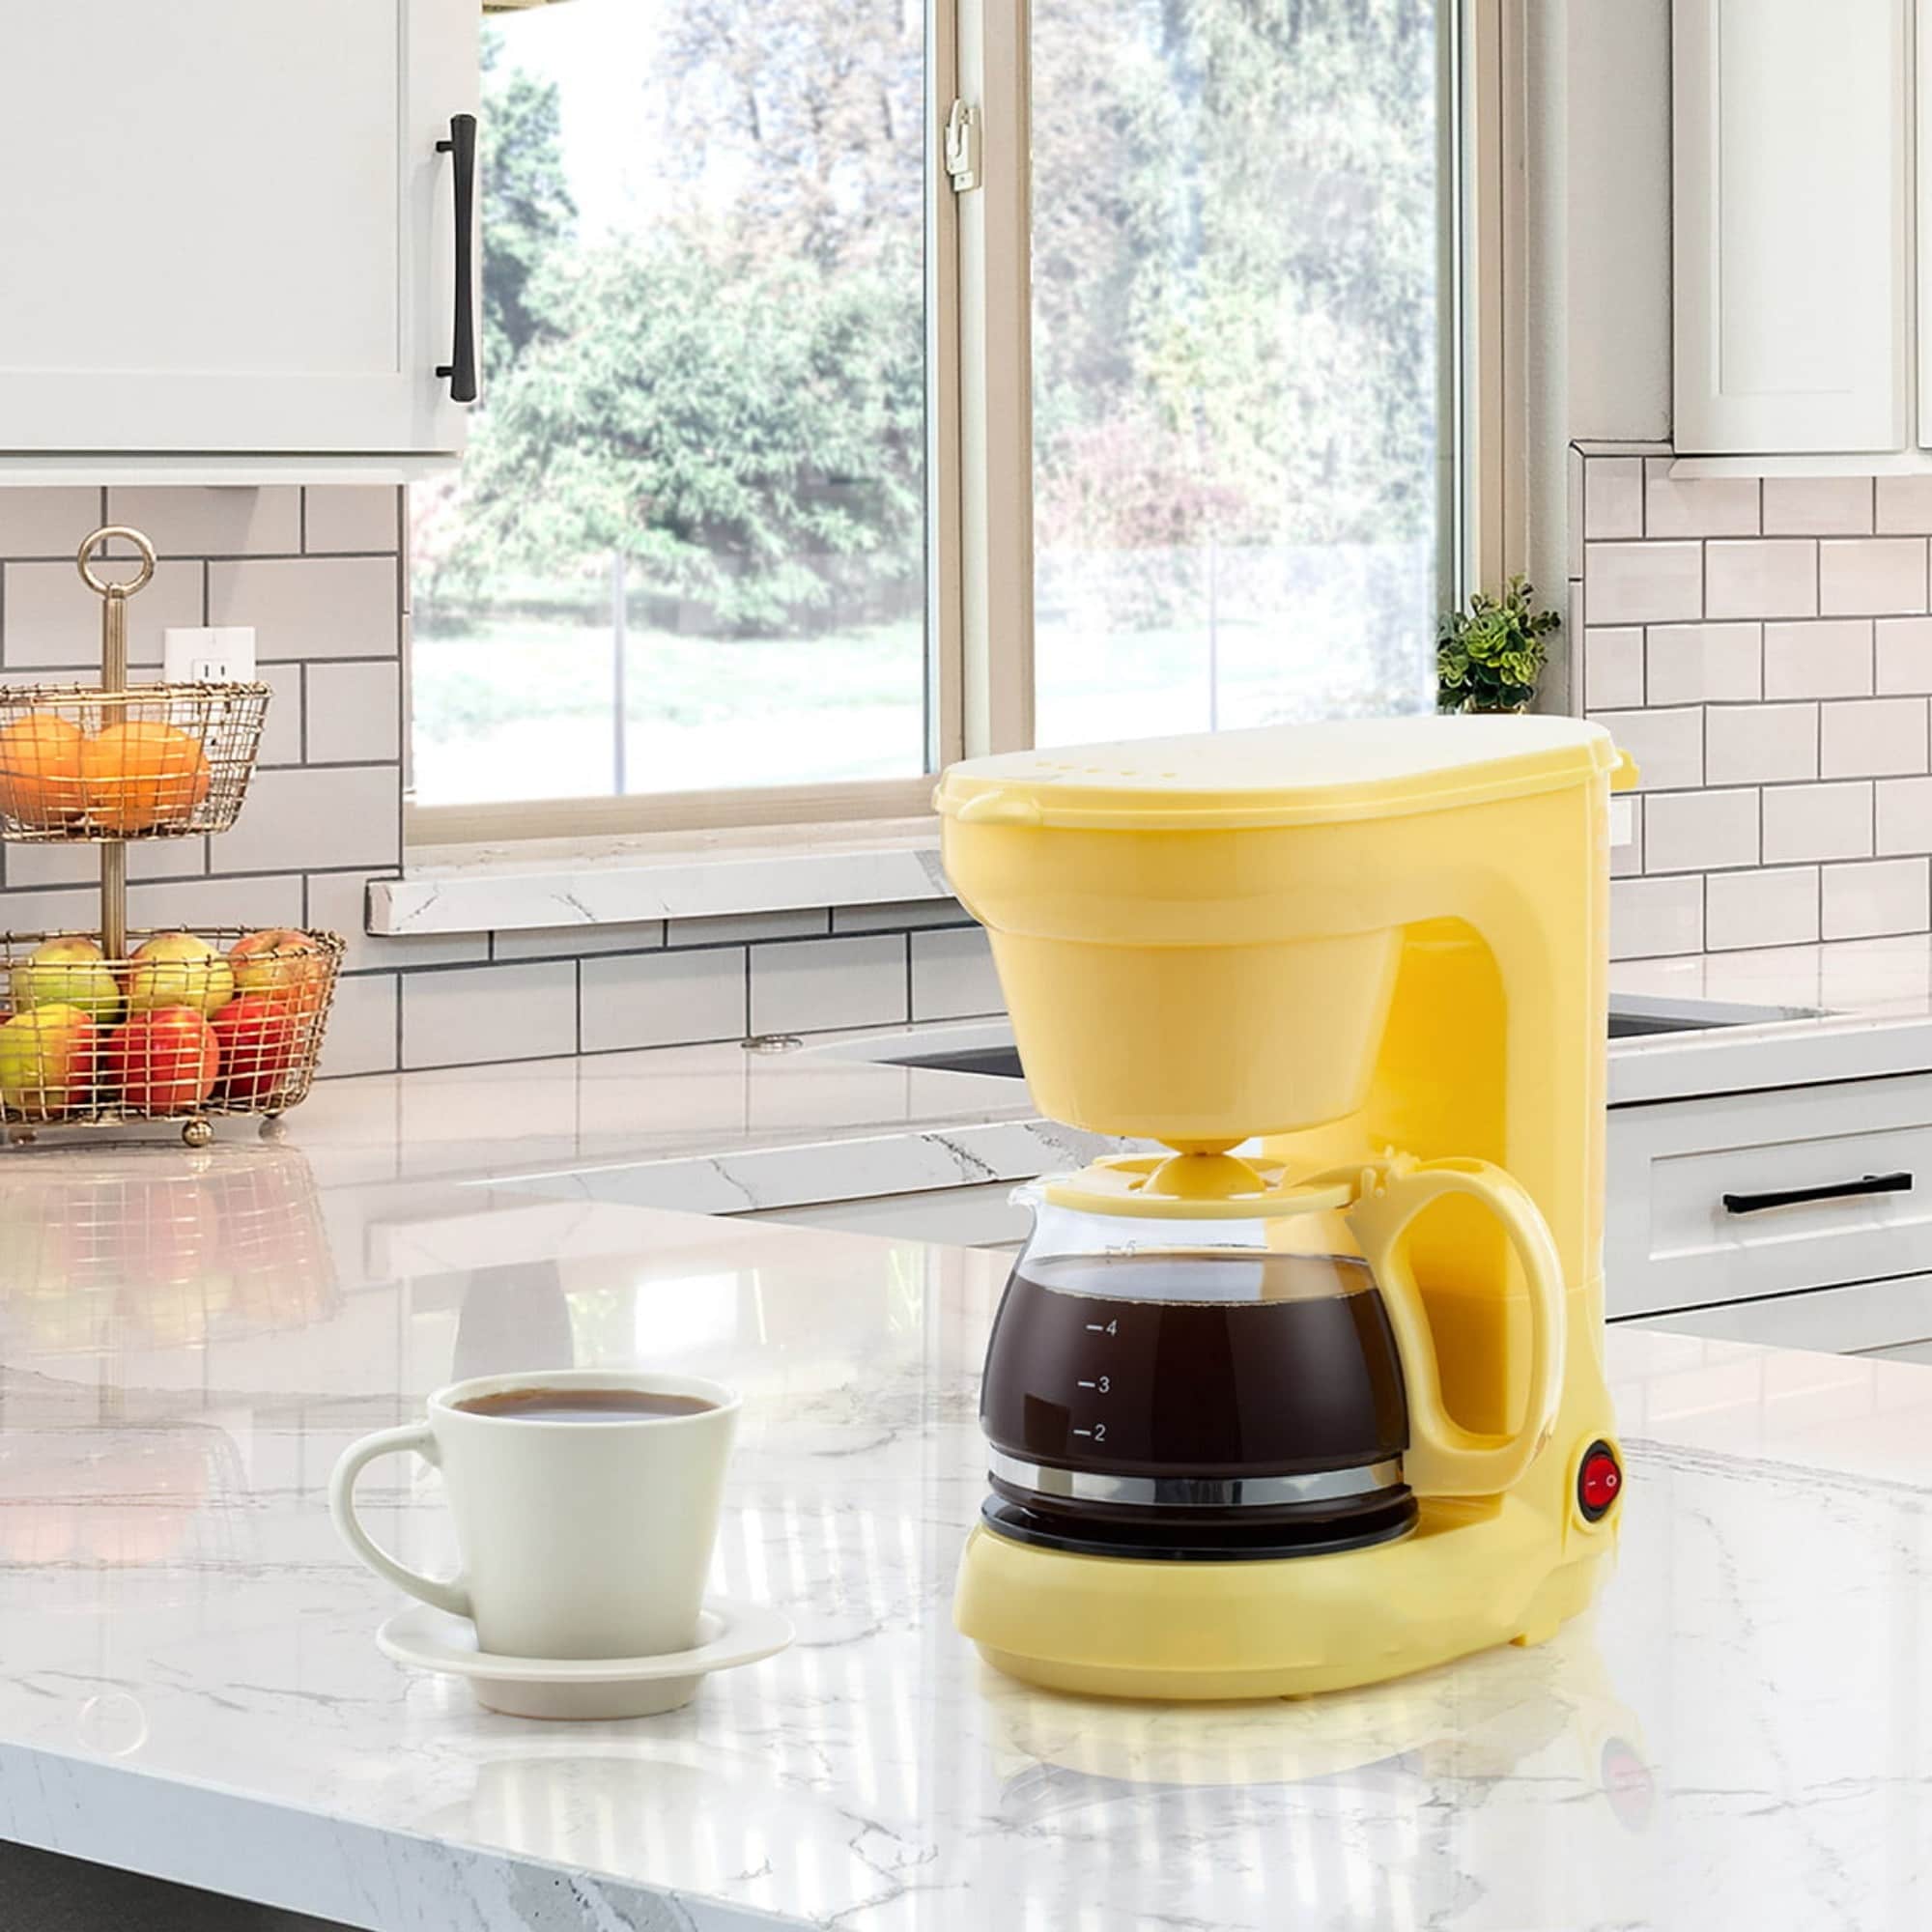 https://ak1.ostkcdn.com/images/products/is/images/direct/5745f28a5045184ddadfe4054cdcb315cfe27a20/5CUP-Coffee-Maker---Space-Saving-Design%2C-Auto-Pause-and-Serve%2C-Removable-Filter-Basket%2C-BLACK.jpg